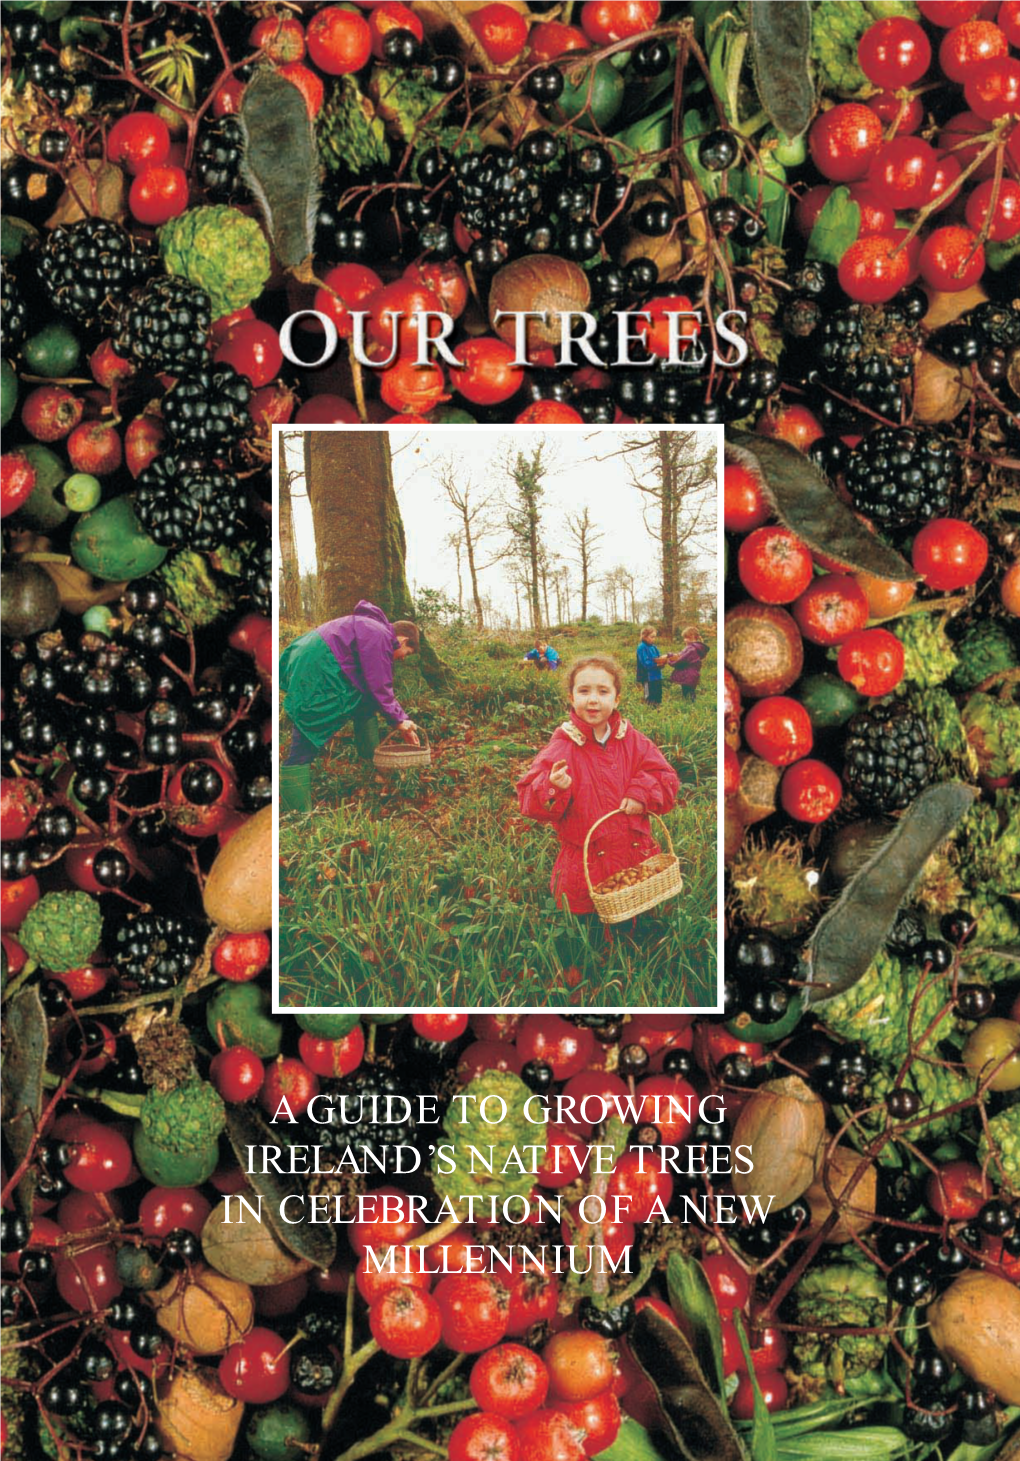 A Guide to Growing Ireland's Native Trees in Celebration